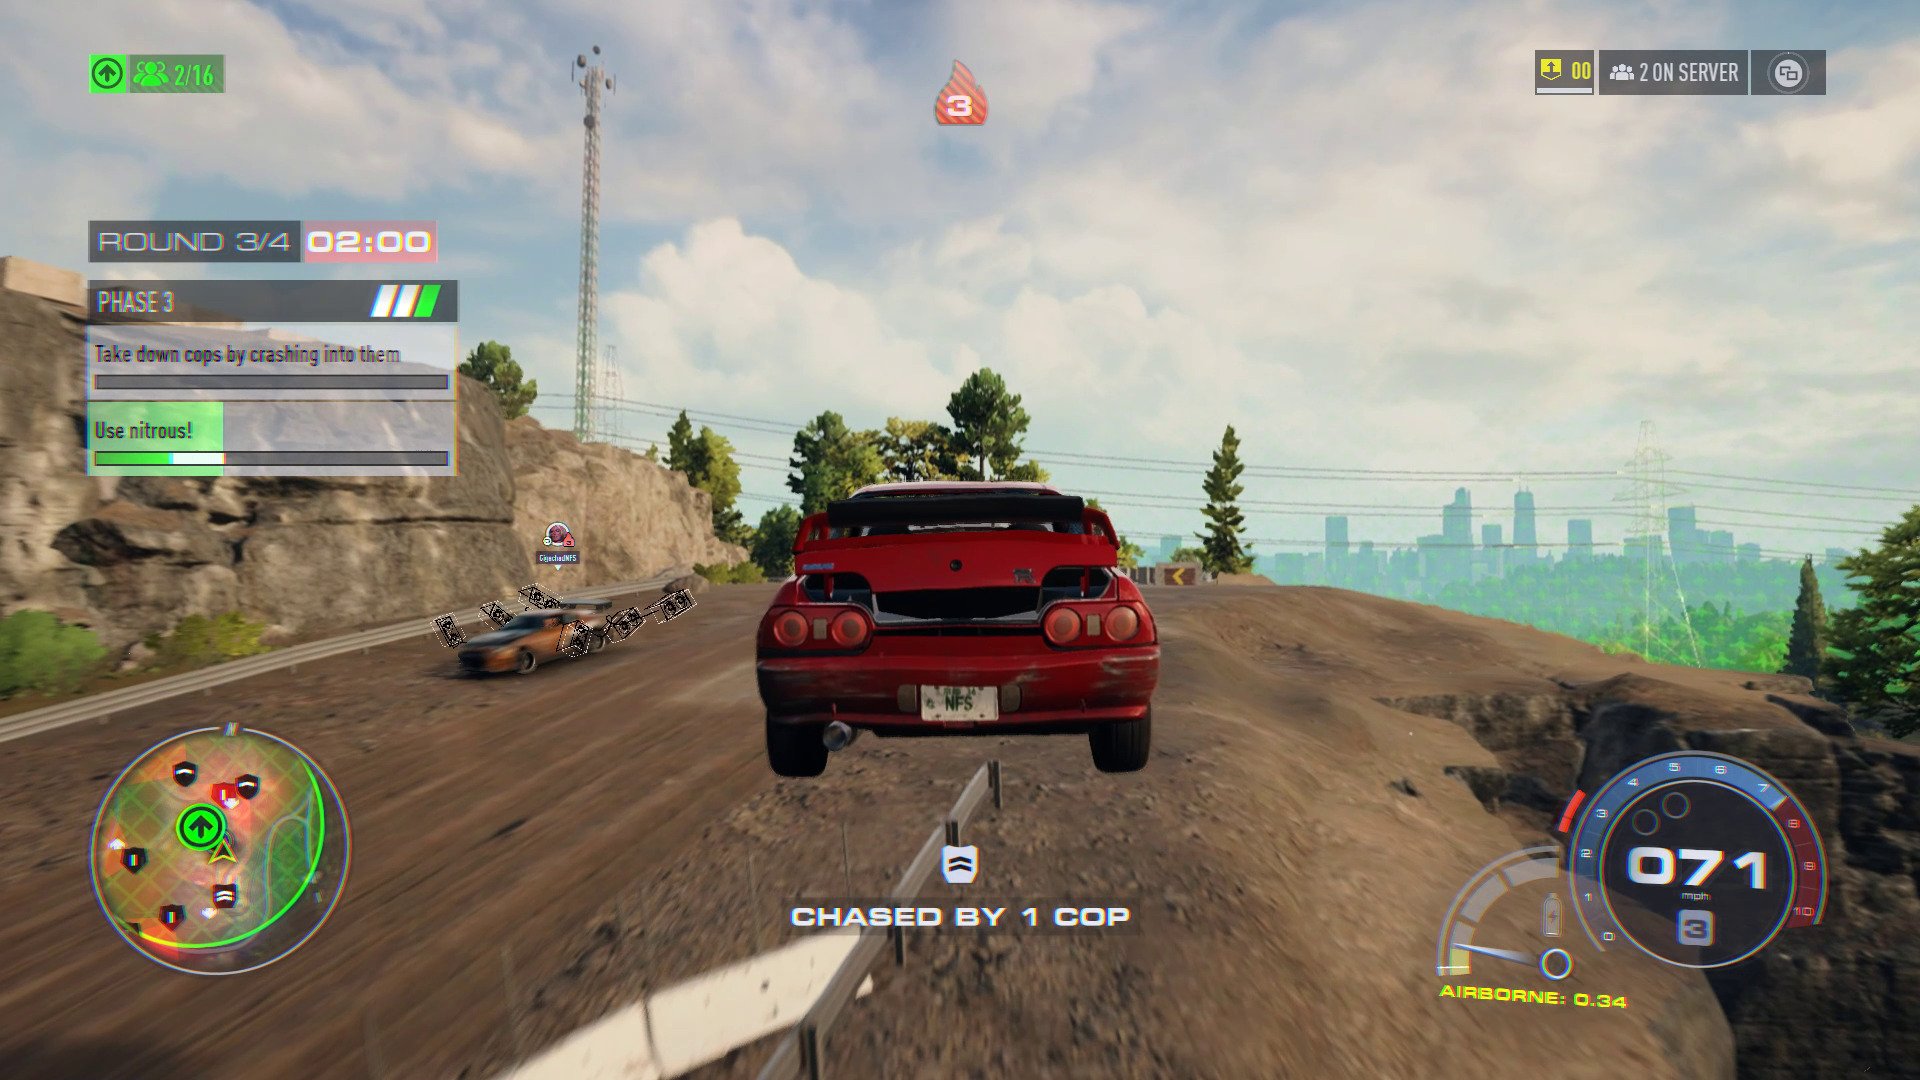 Review | Need For Speed Unbound